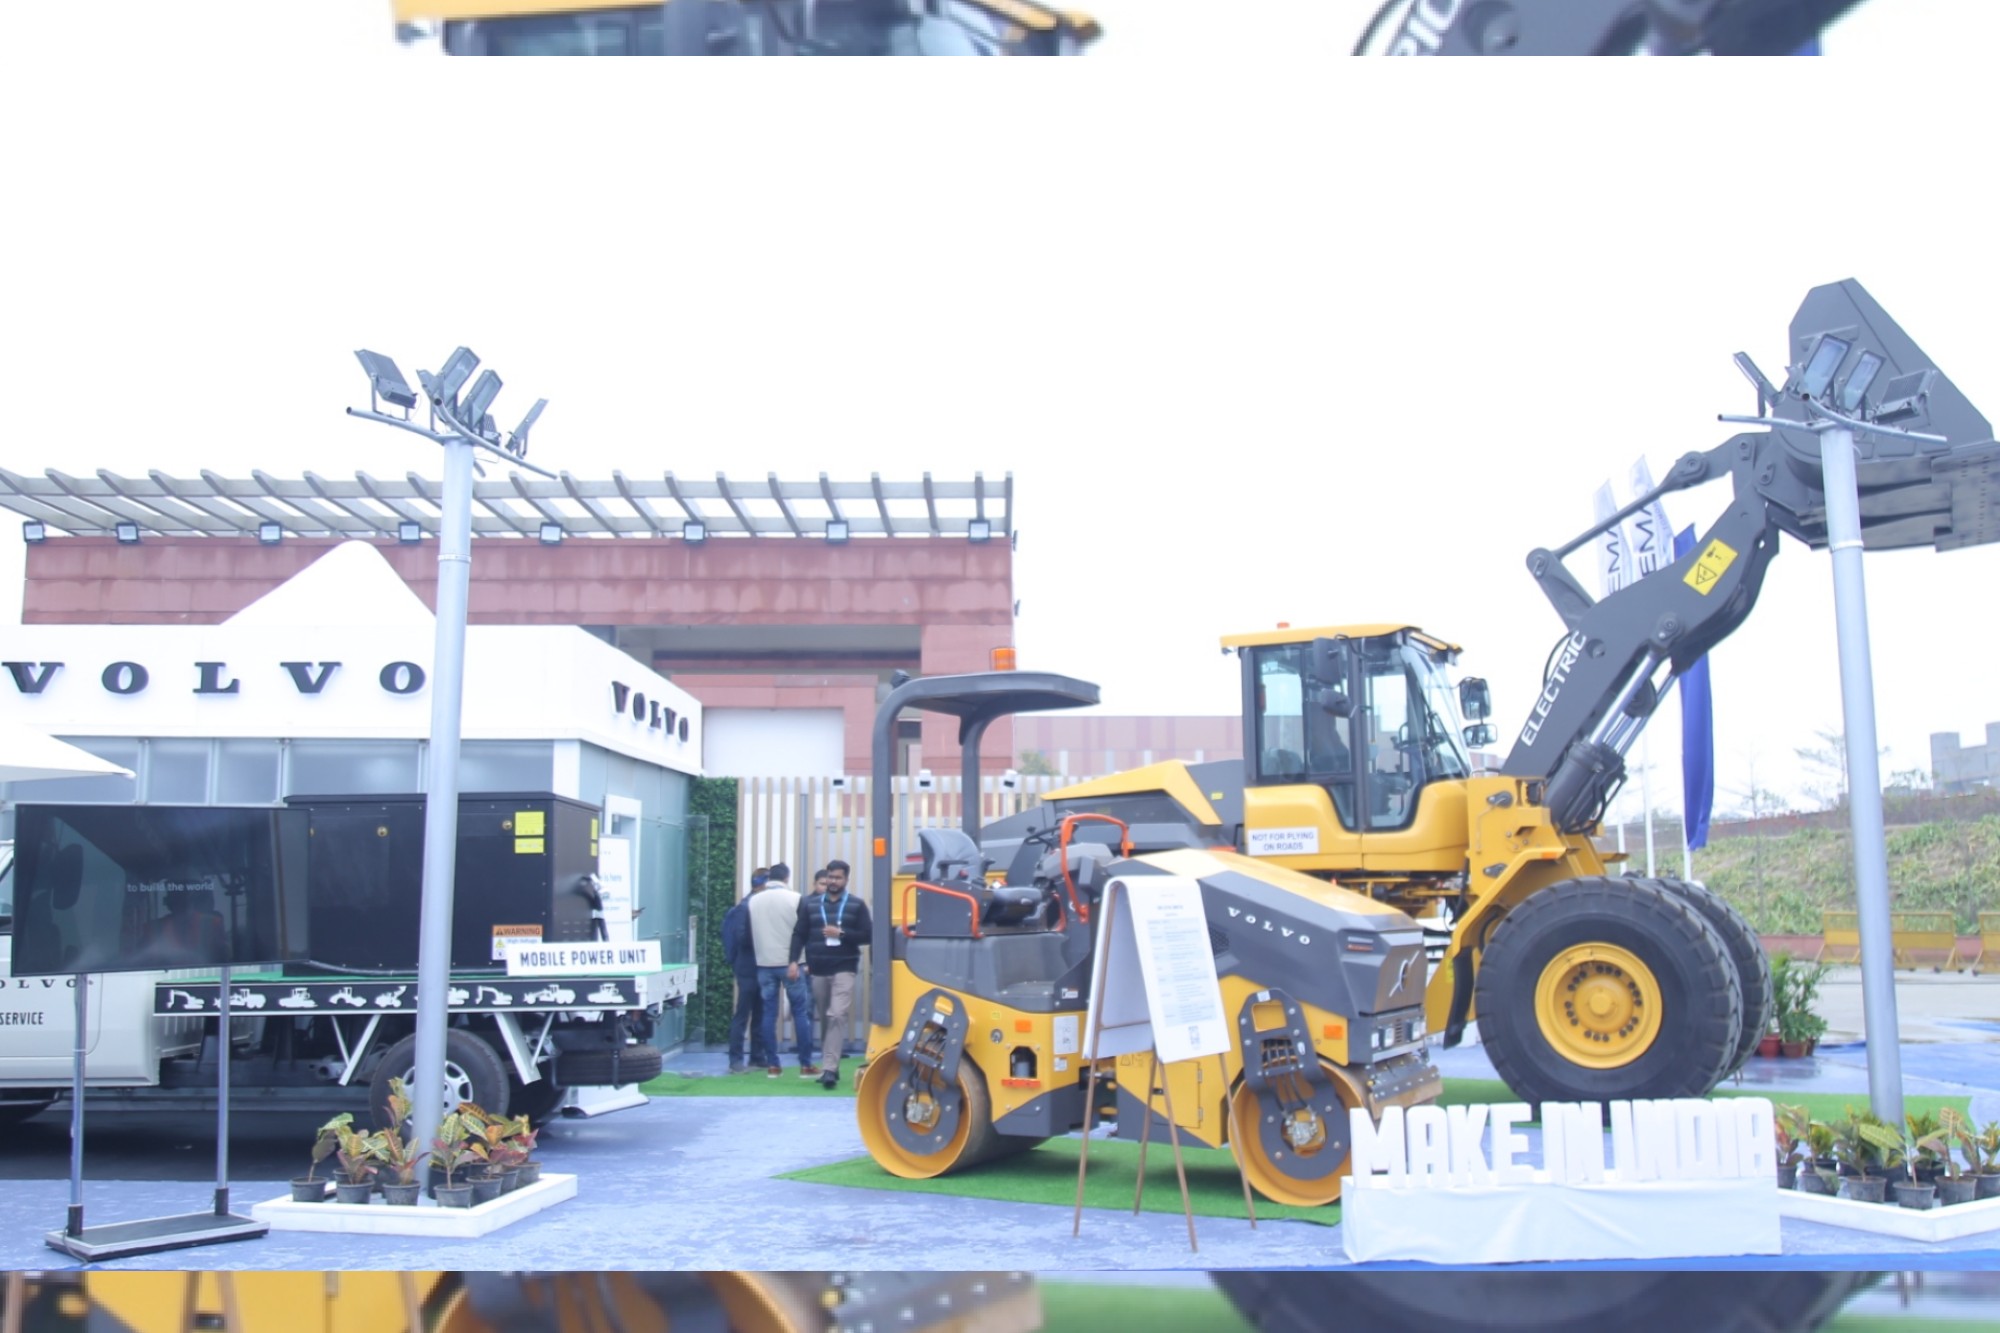 Volvo Construction Equipment (Volvo CE) India took center stage at the inaugural Bharat Mobility Global Expo 2024 in New Delhi, showcasing a groundbreaking array of zero-emission construction and mining equipment.